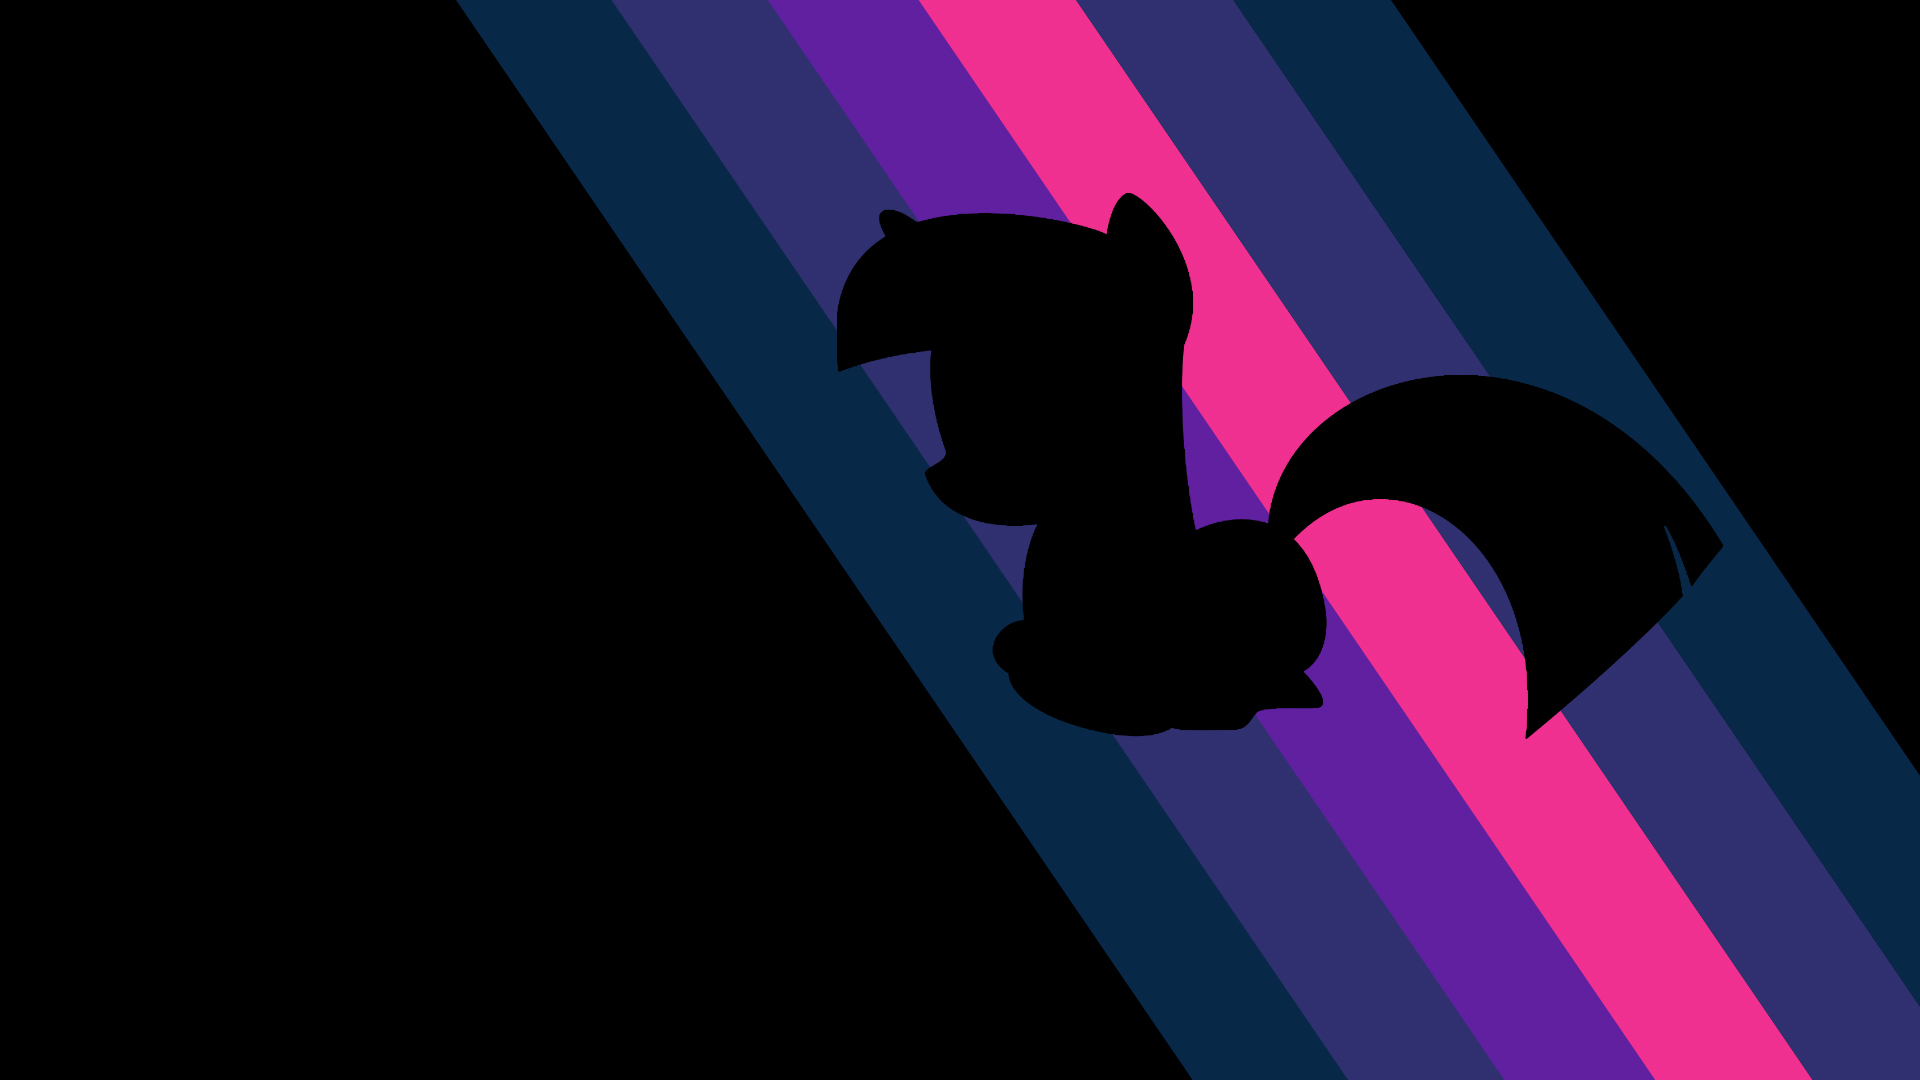 Twilight Sparkle Invert Wallpaper by PhantomBadger and PonyDude186